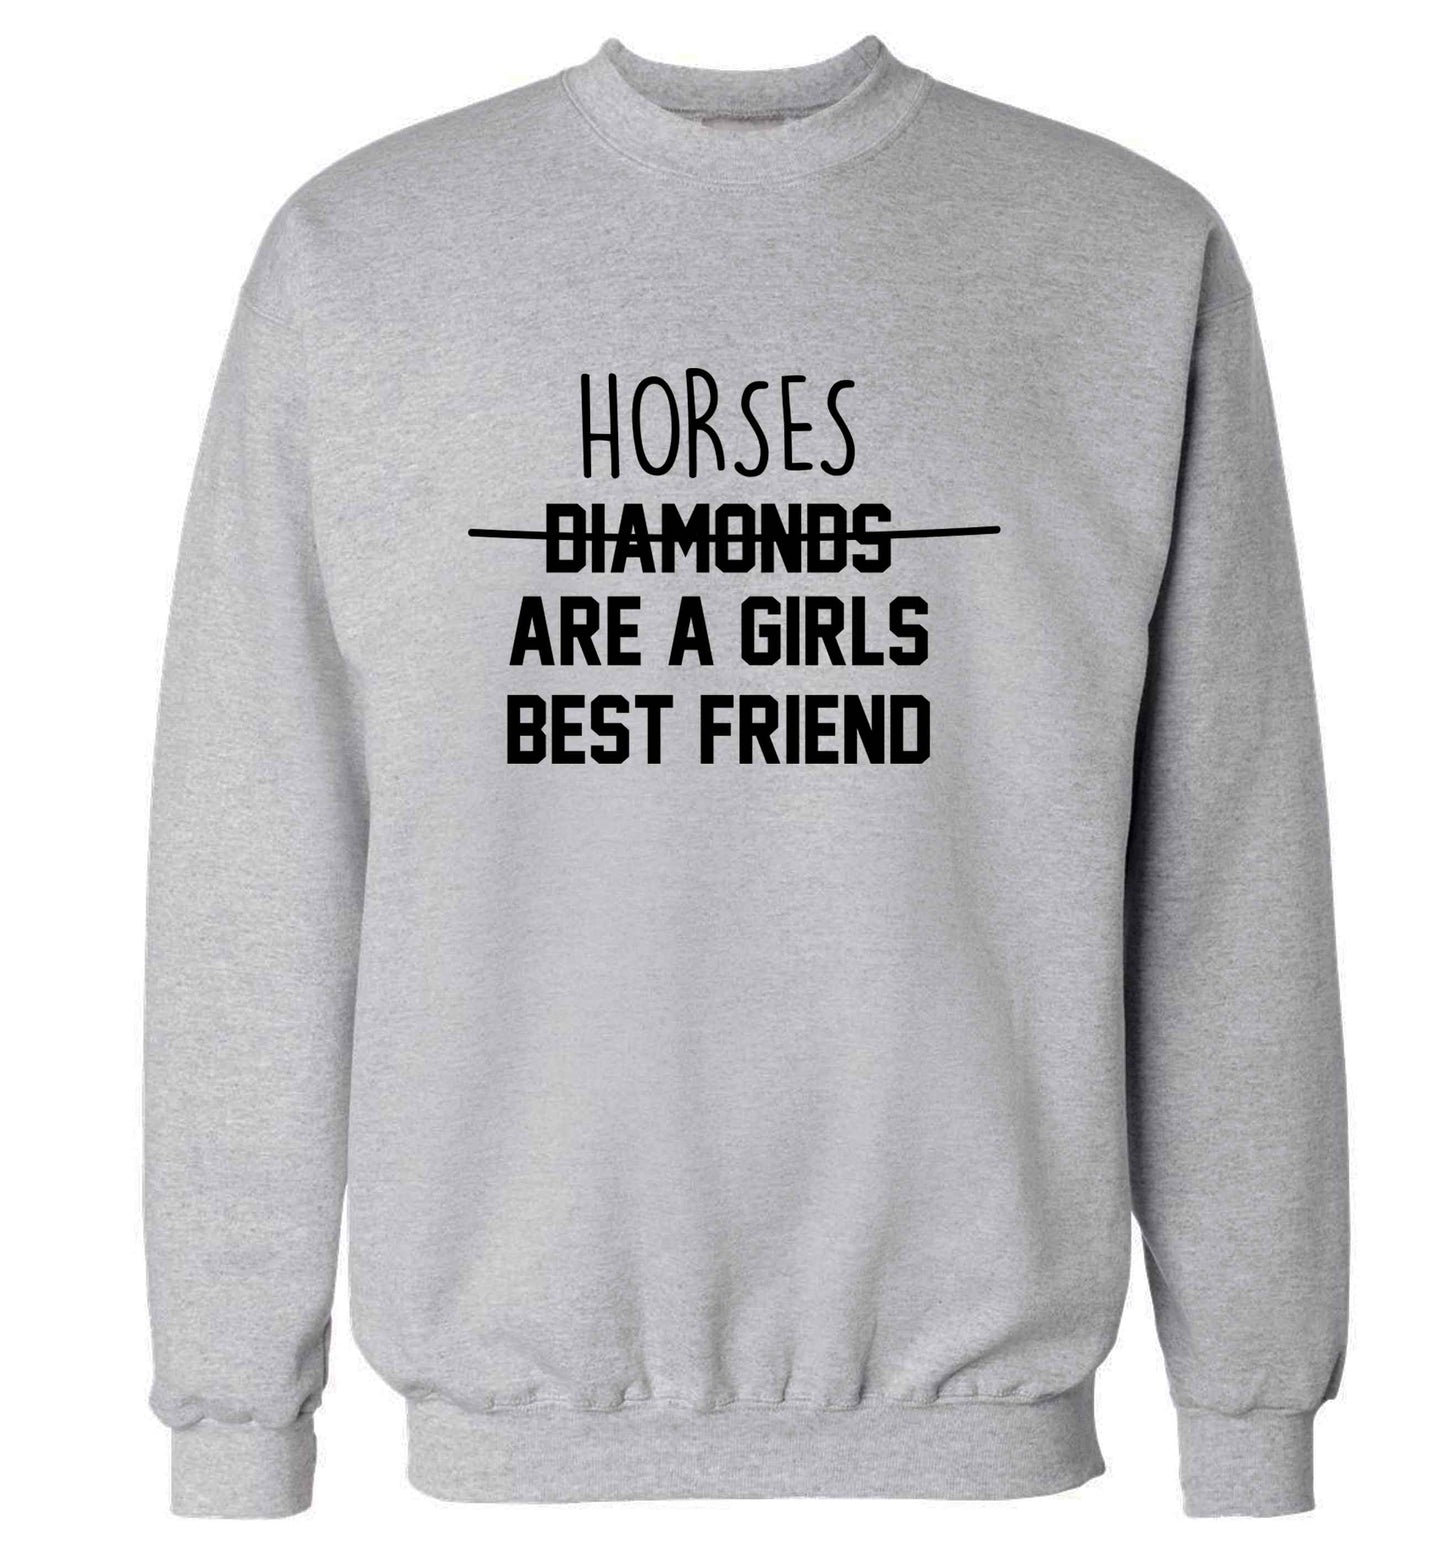 Horses are a girls best friend adult's unisex grey sweater 2XL